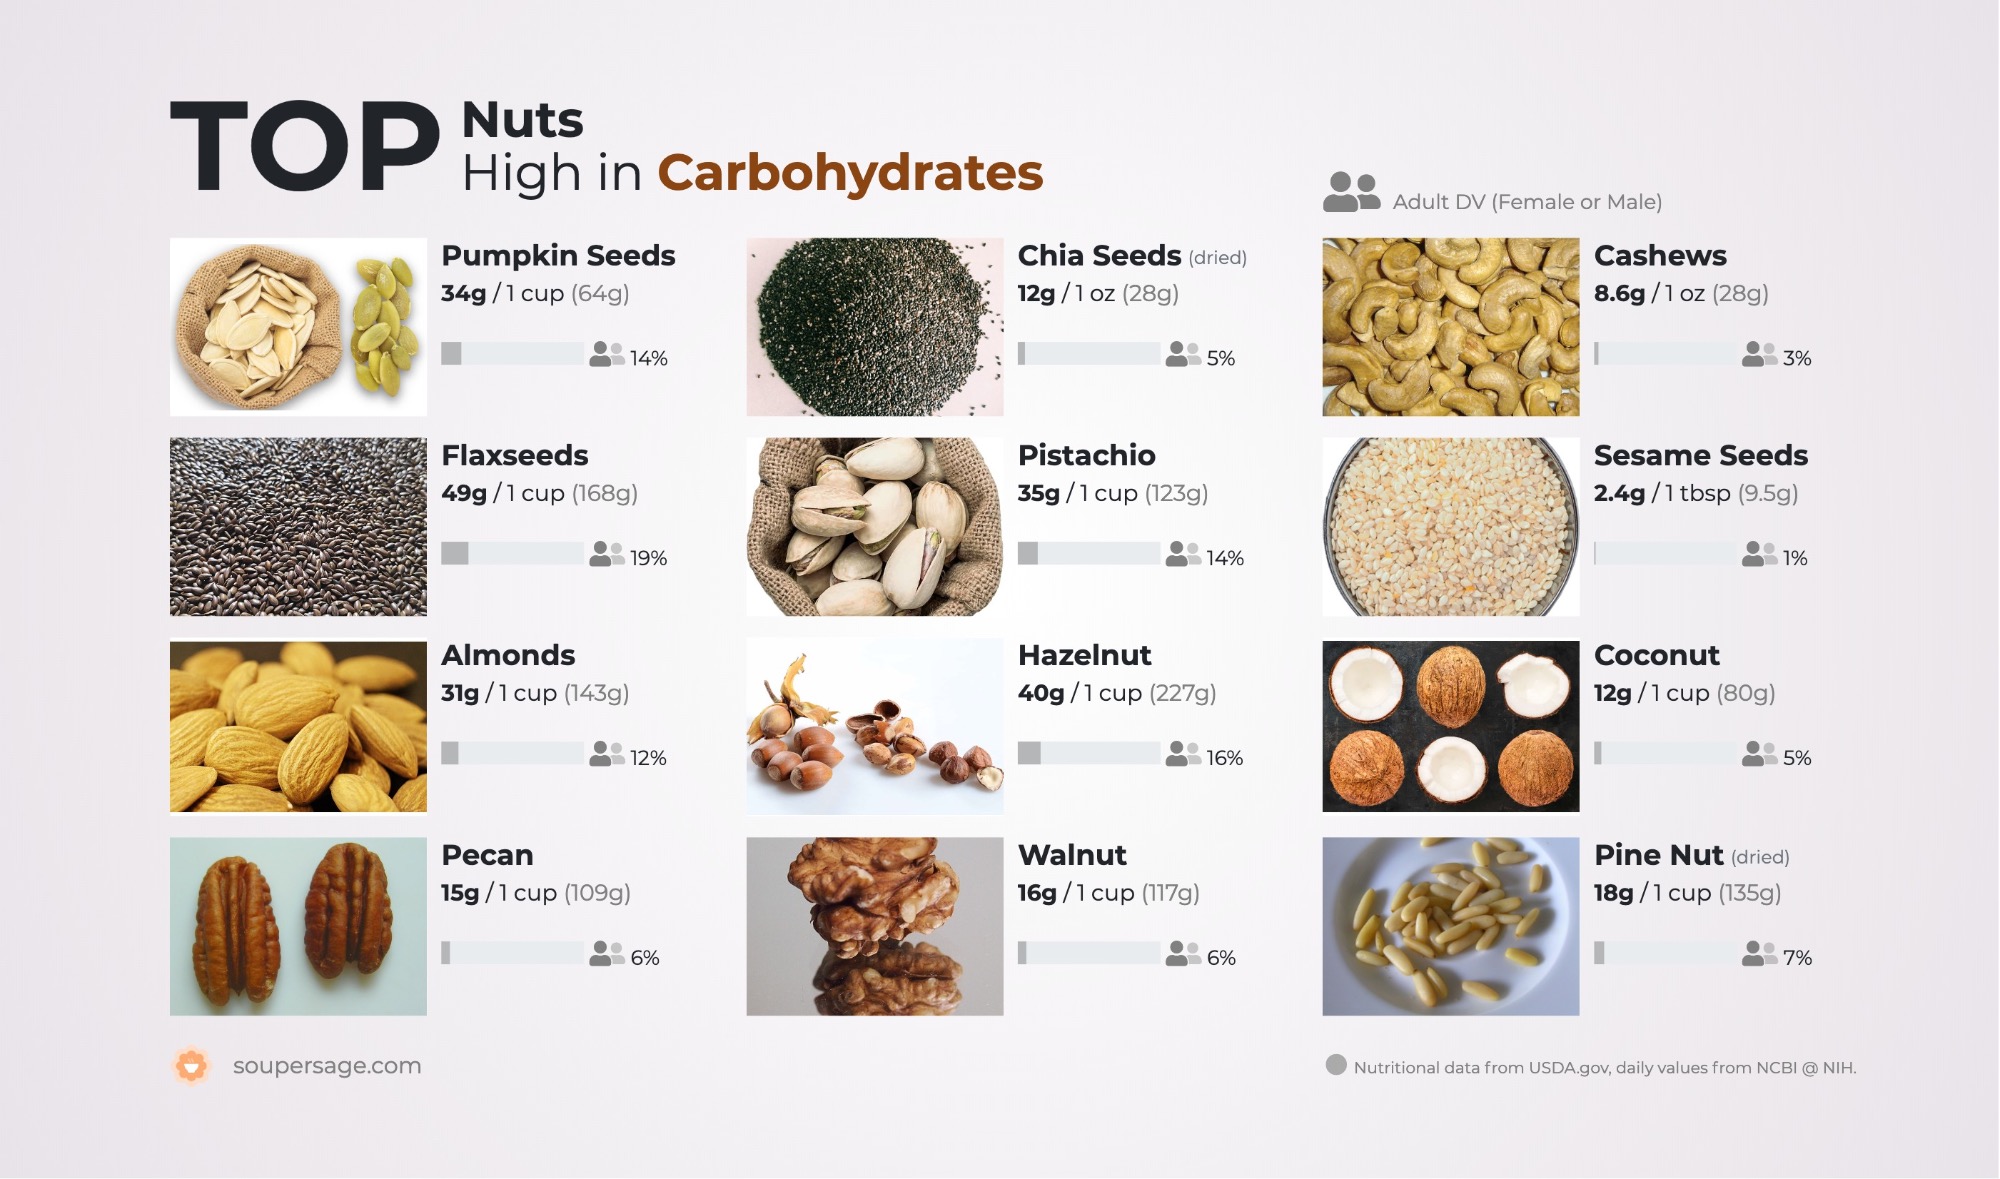 image of Top Nuts High in Carbohydrates